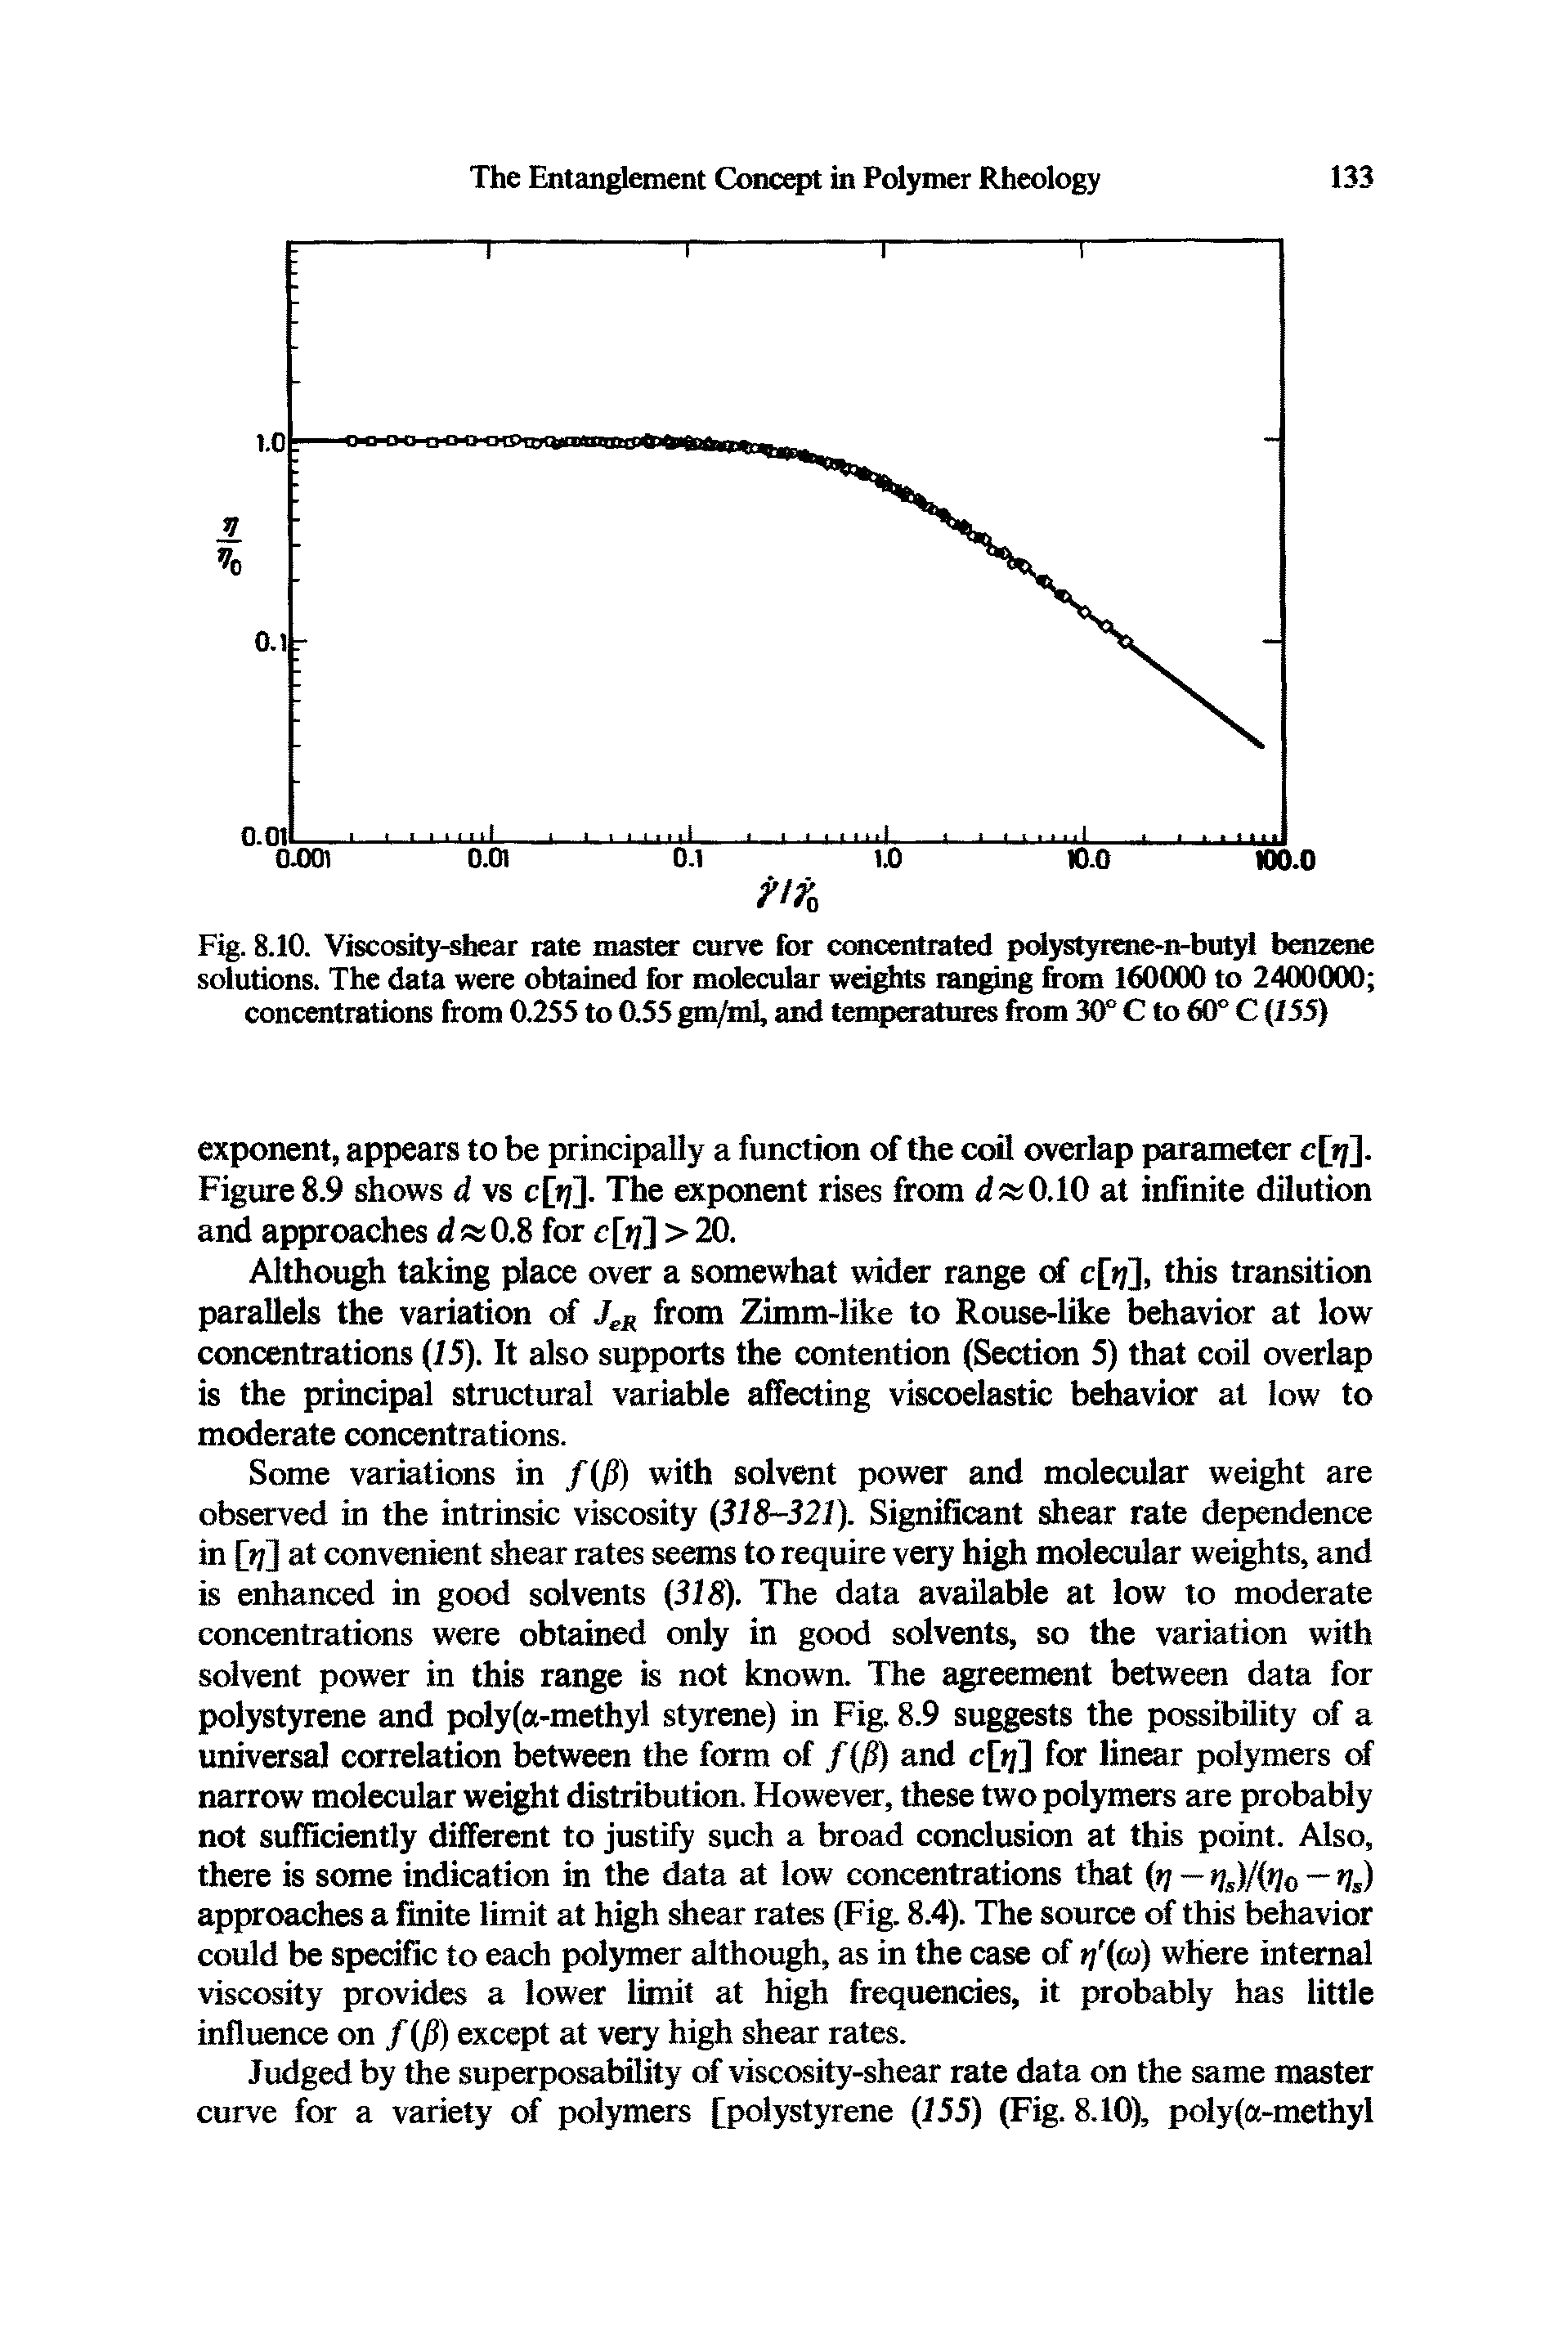 Fig. 8.10. Viscosity-shear rate master curve for concentrated polystyrene-n-butyl benzene solutions. The data were obtained for molecular weights ranging from 160000 to 2400000 concentrations from 0.255 to 0.55 gm/ml, and temperatures from 30° C to 60° C (155)...